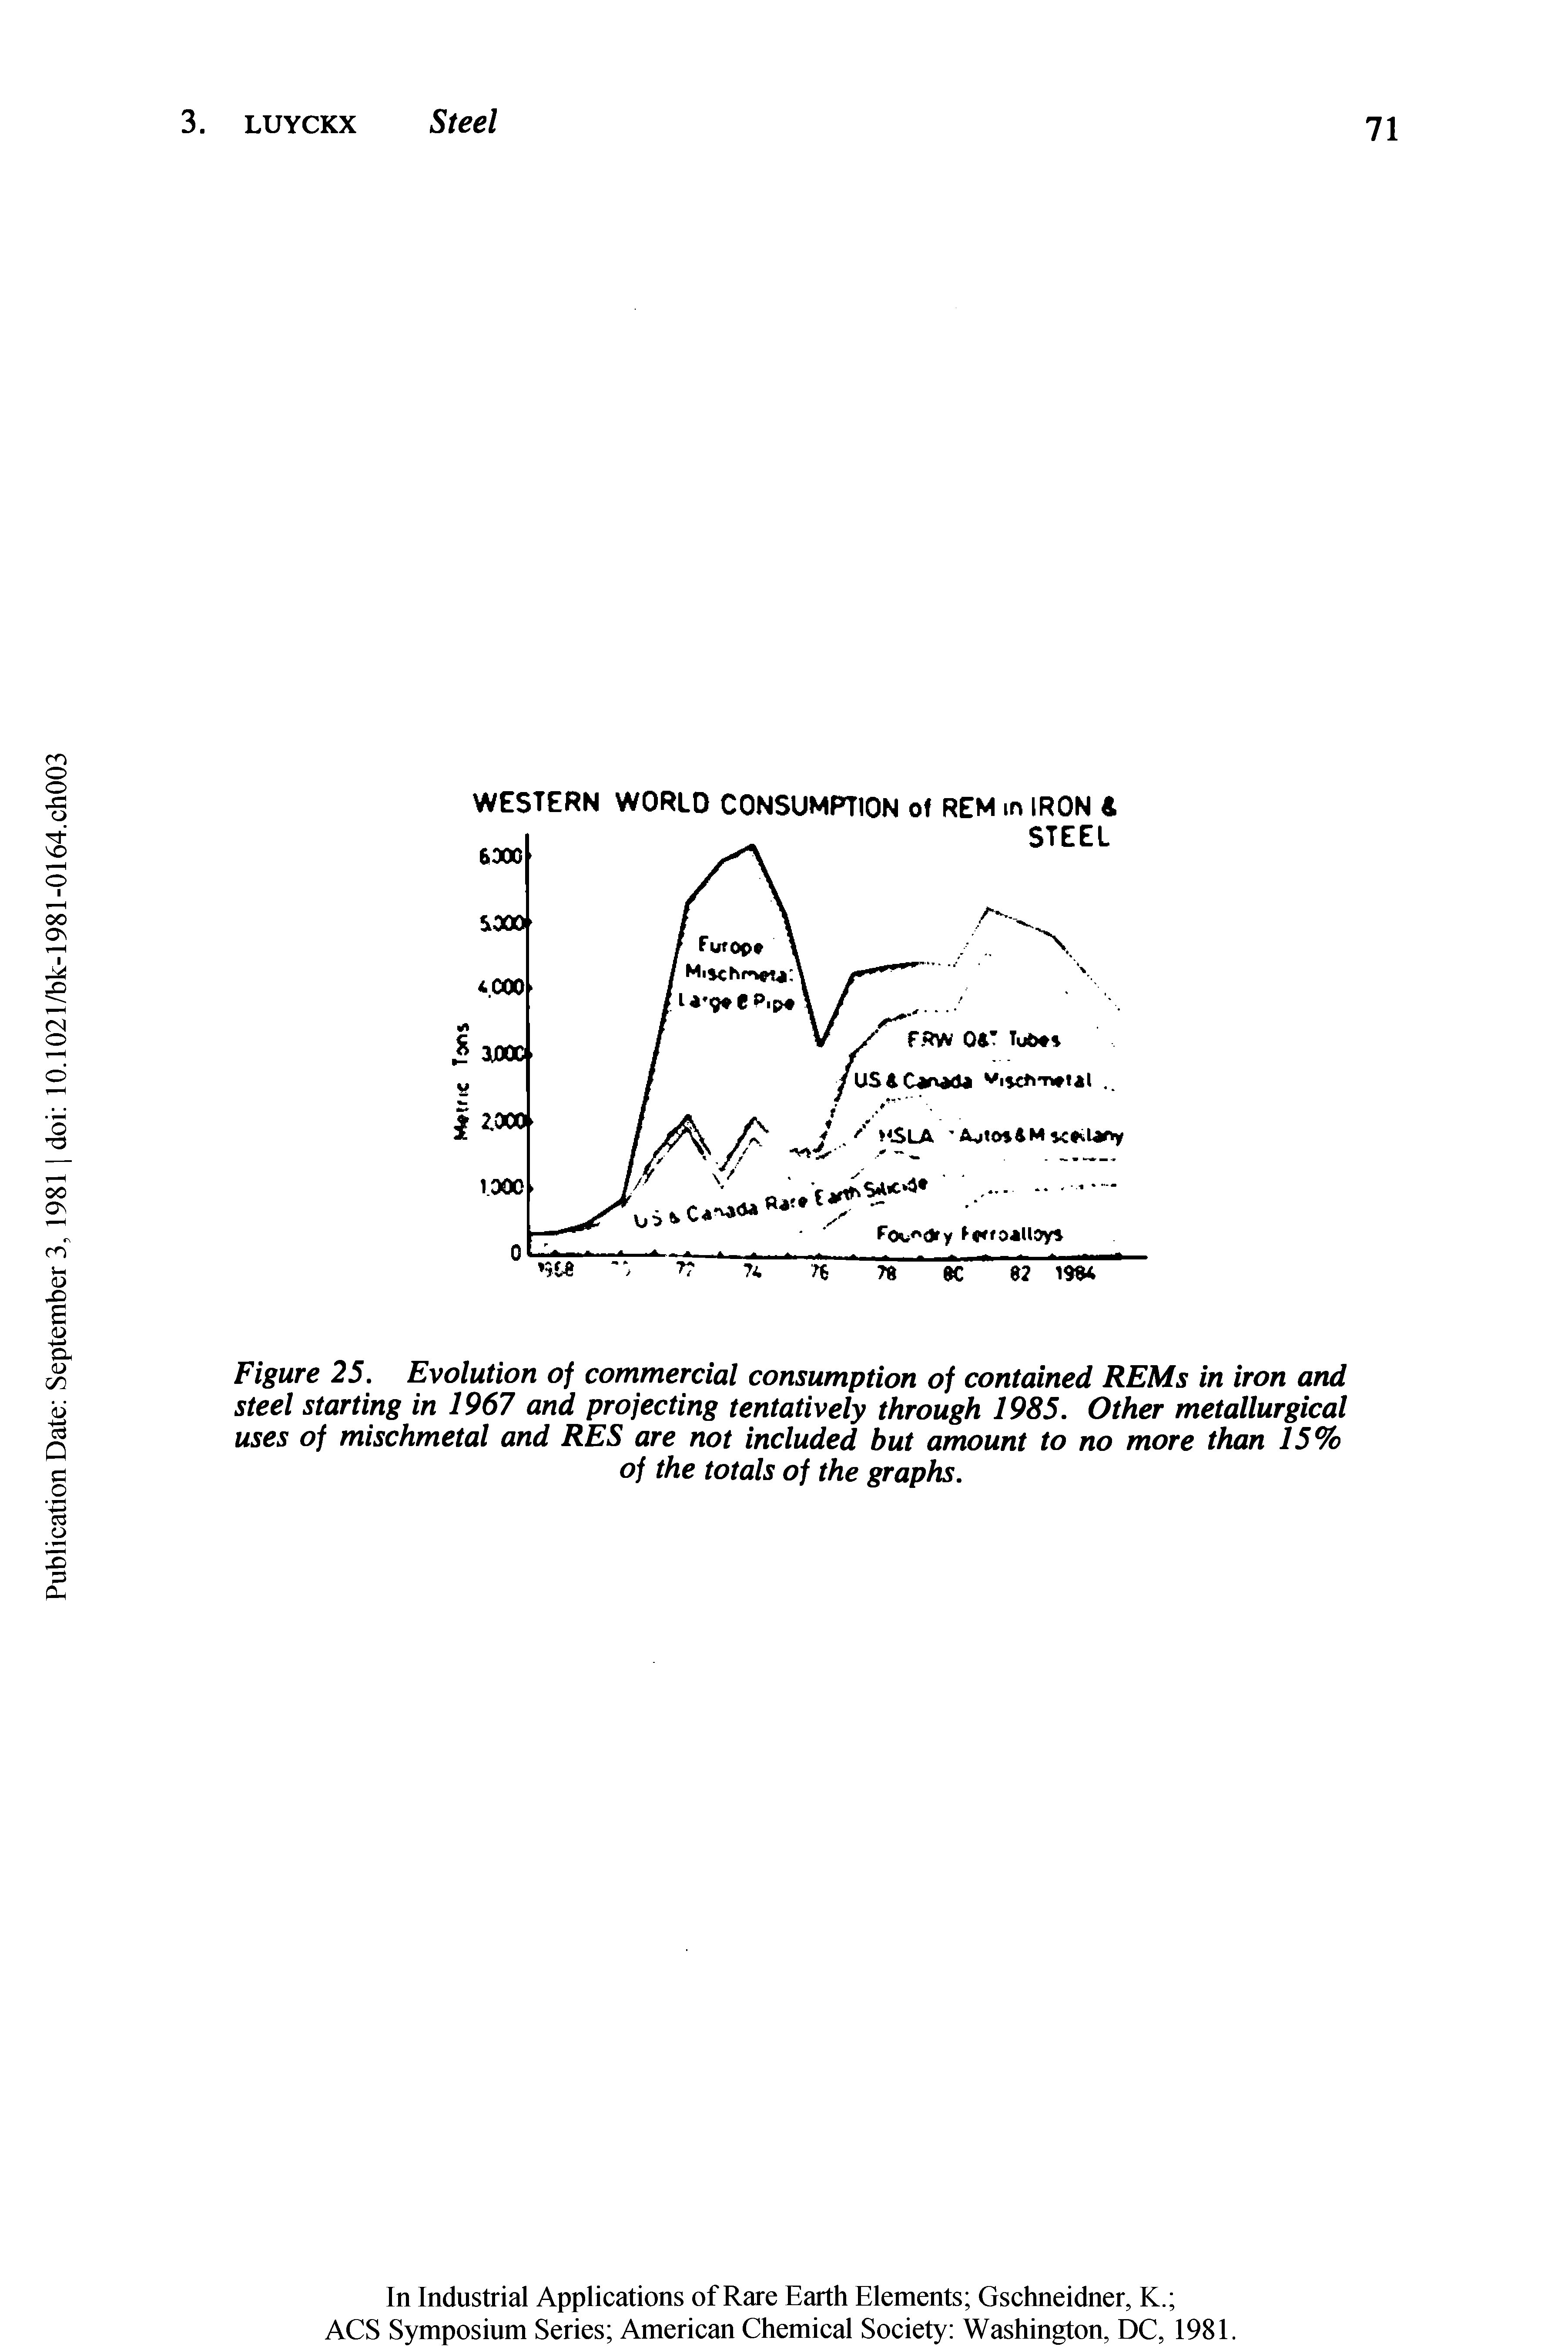 Figure 25. Evolution of commercial consumption of contained REMs in iron and steel starting in 1967 and projecting tentatively through 1985. Other metallurgical uses of mischmetal and RES are not included but amount to no more than 15% of the totals of the graphs.